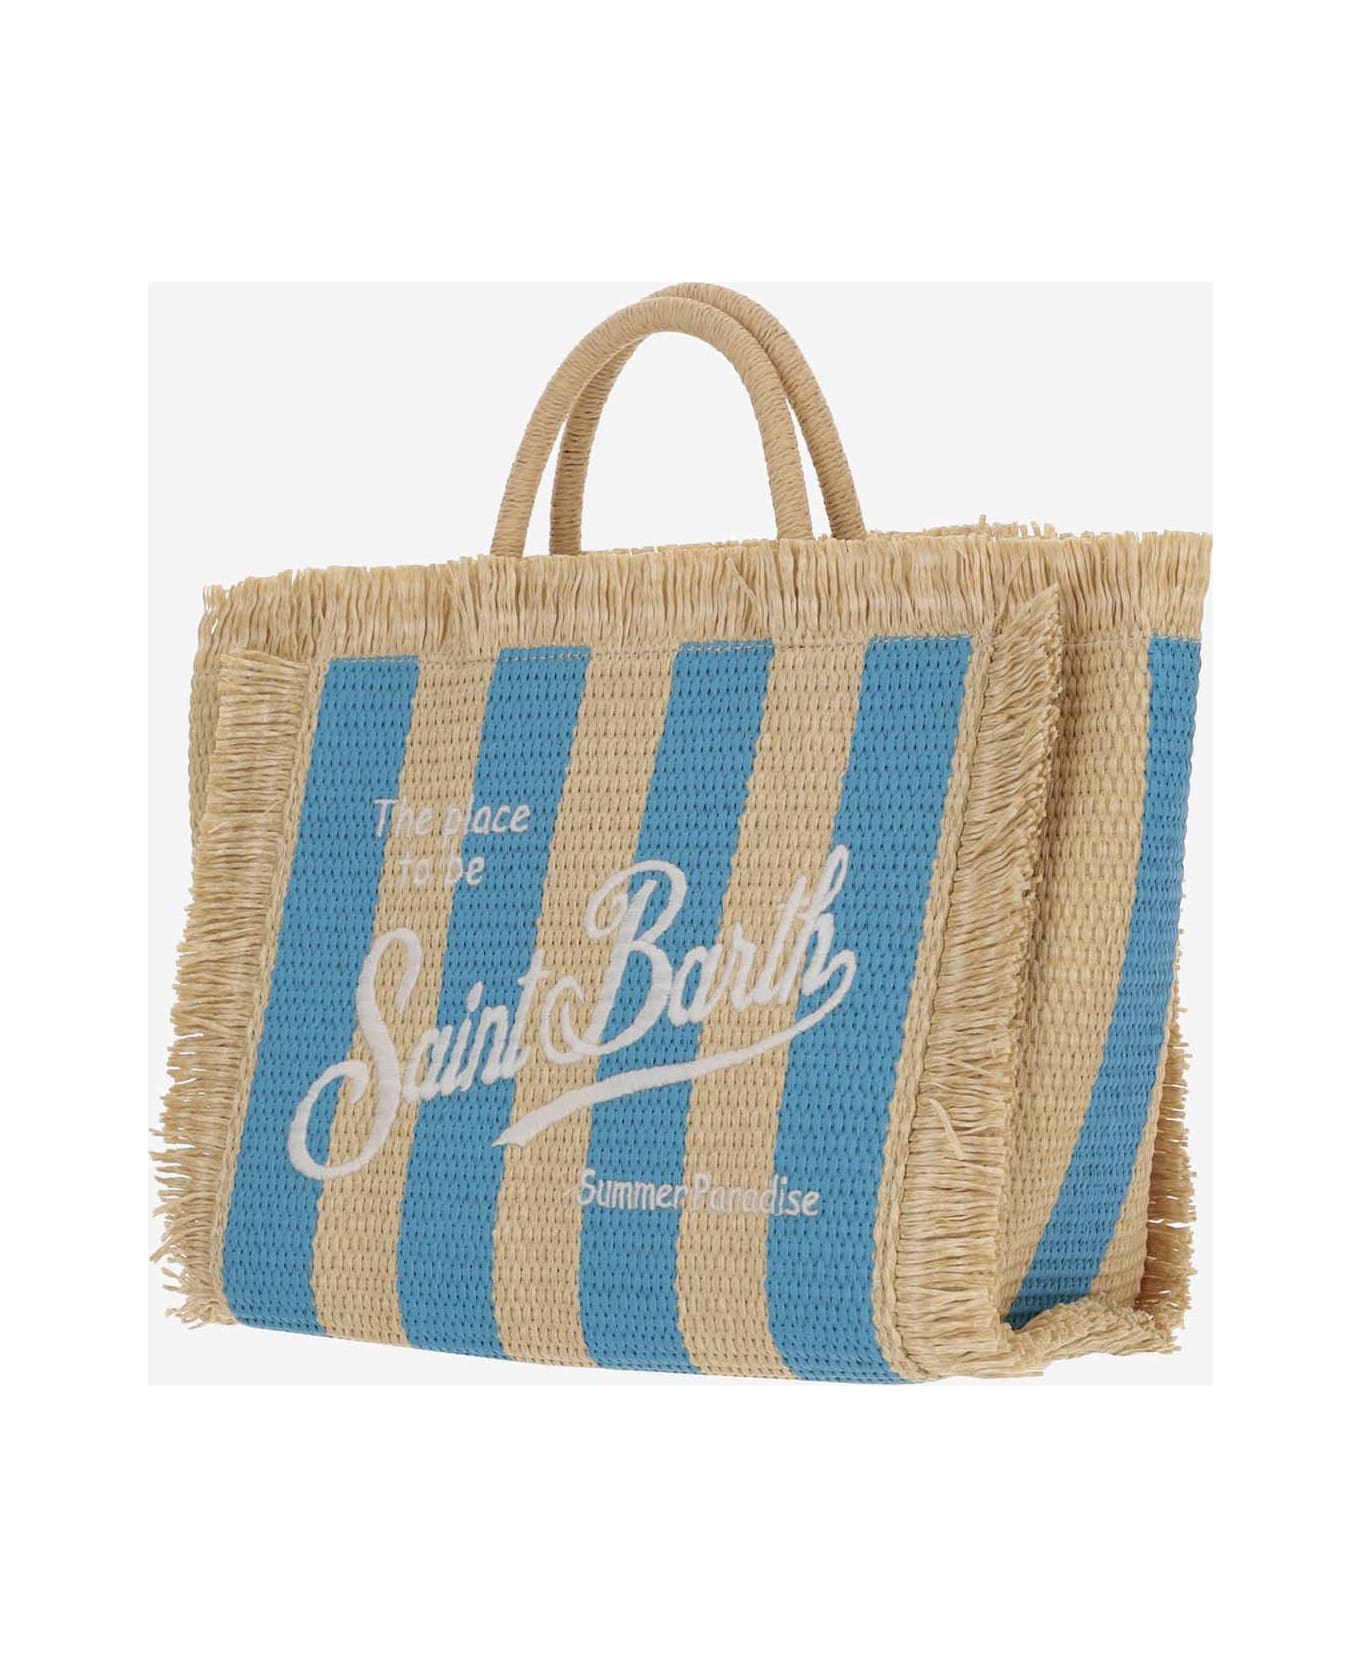 MC2 Saint Barth Colette Tote Bag With Striped Pattern - Red